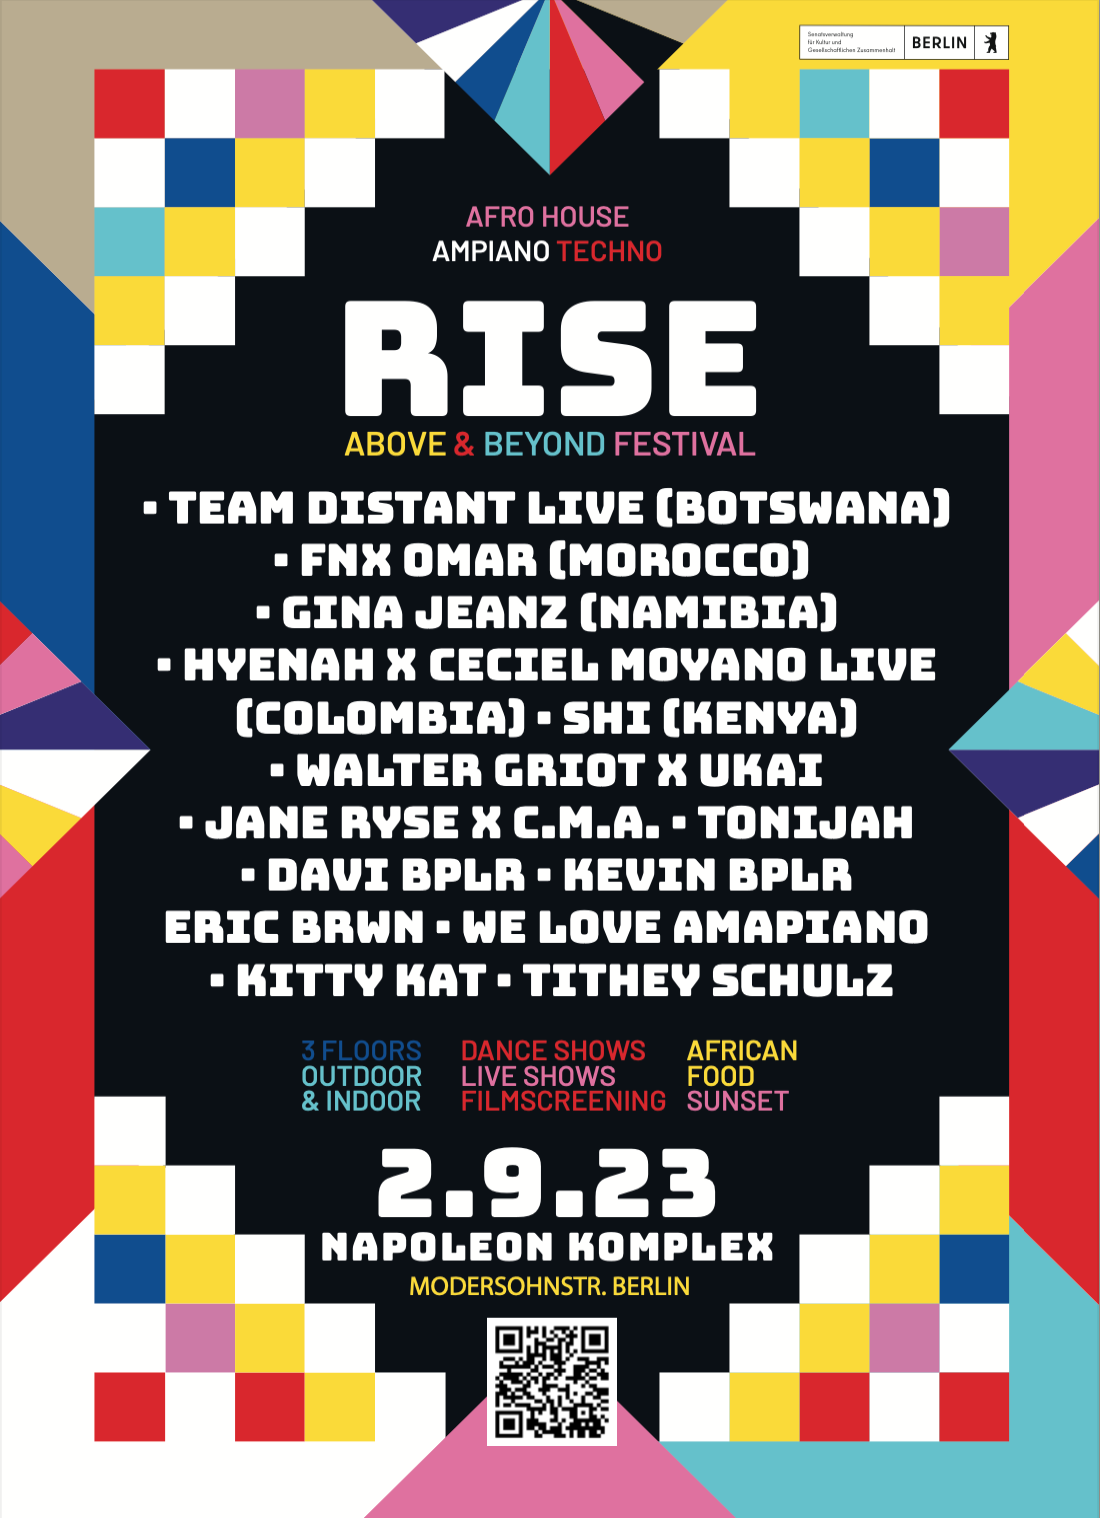 RISE Open Air - Above & Beyond Festival - フライヤー裏